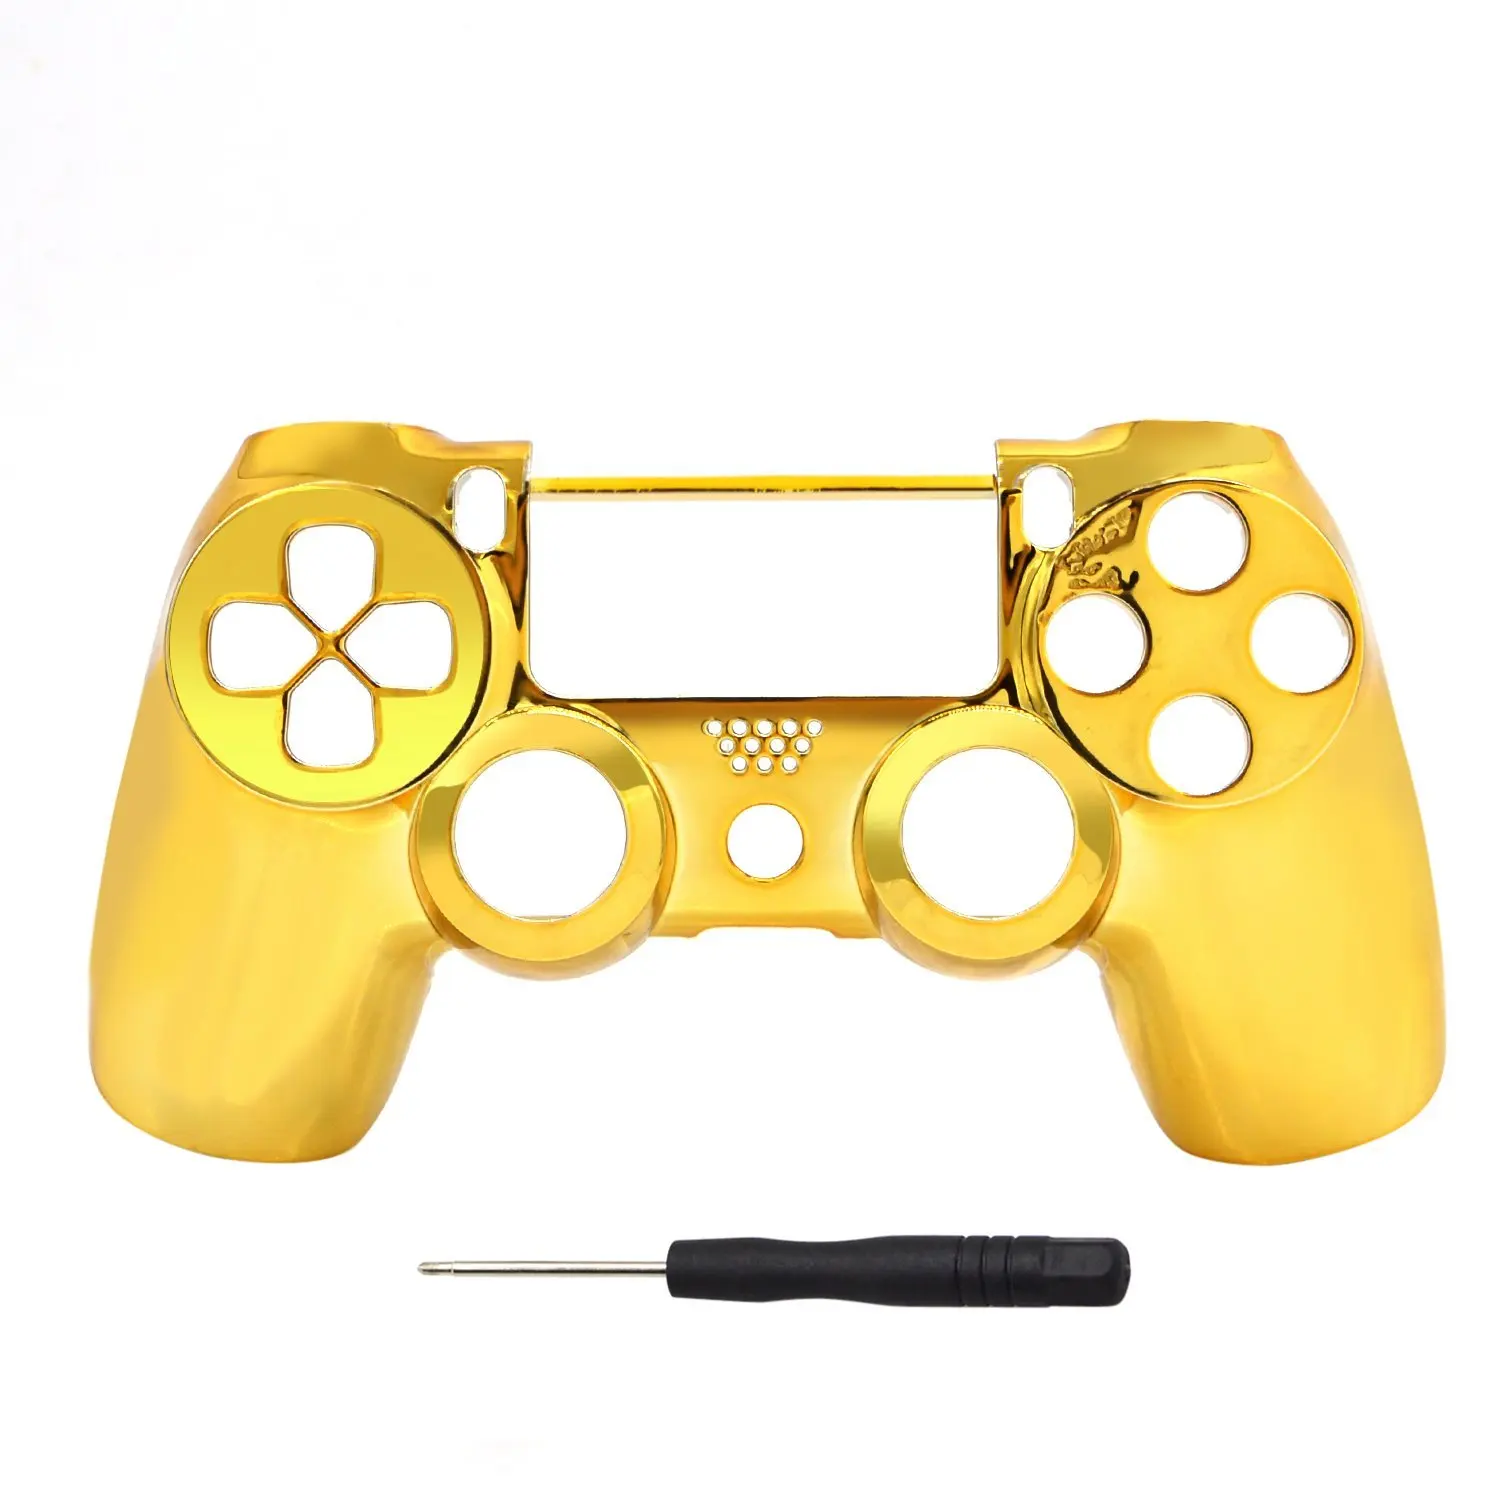 gold ps4 controller price